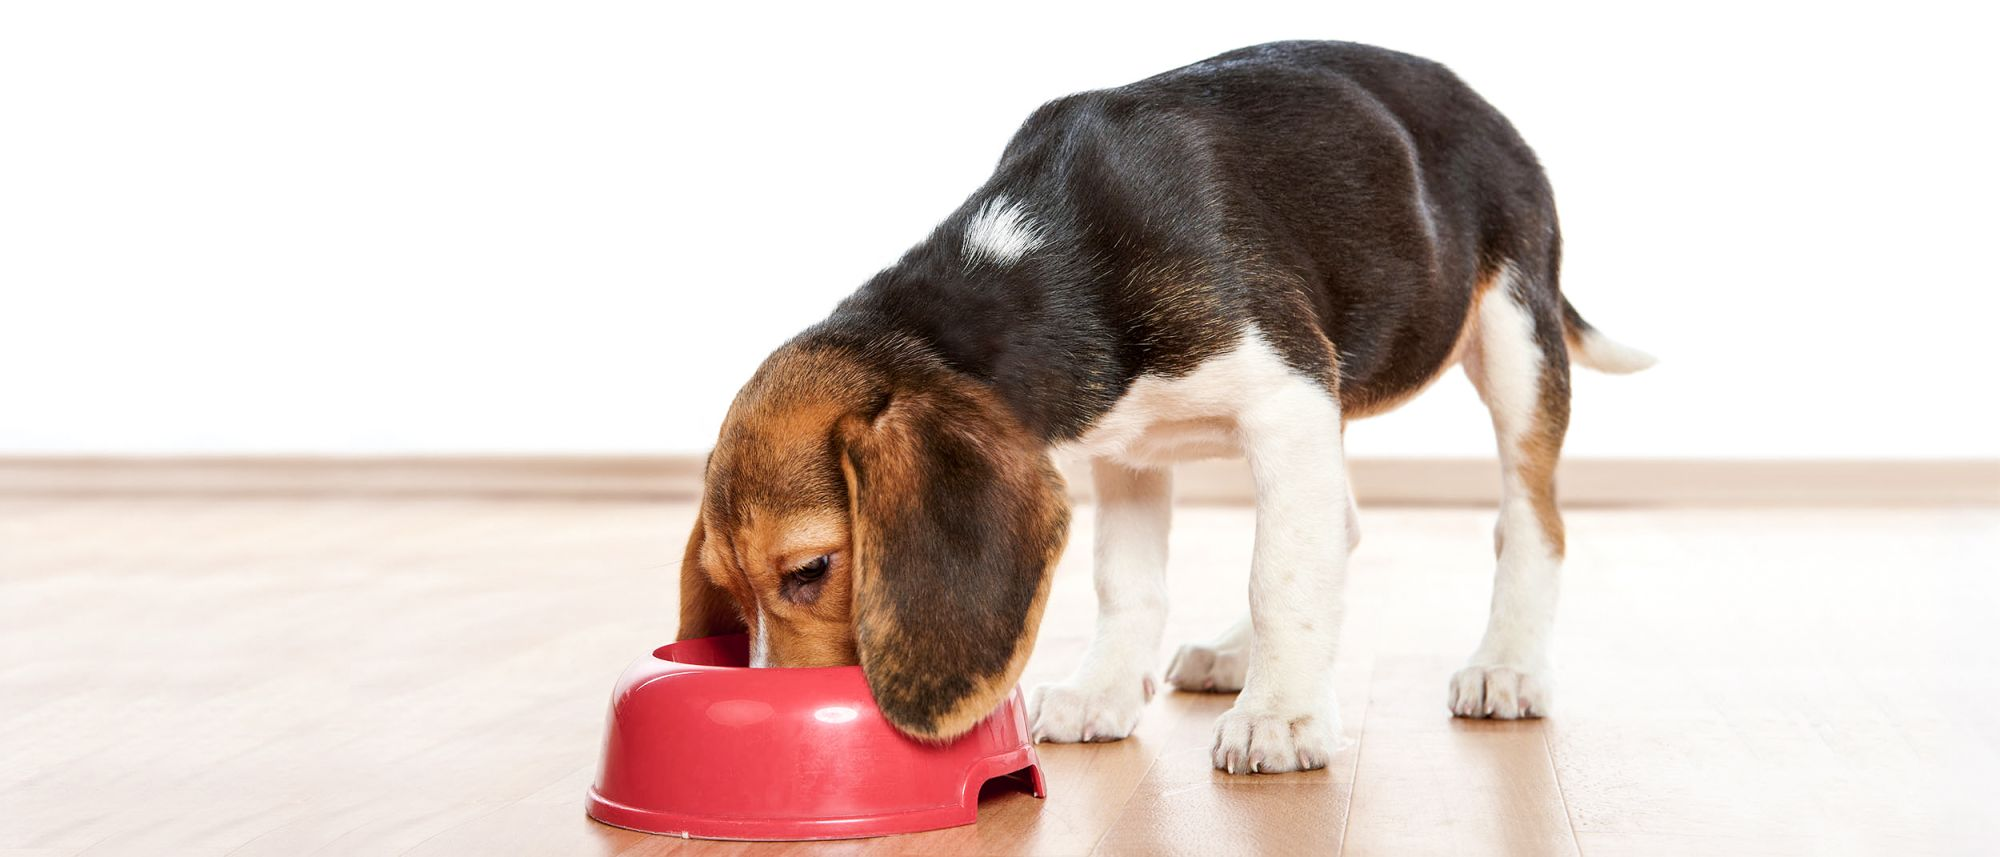 Puppy Beagle standing indoors eating from a red bowl